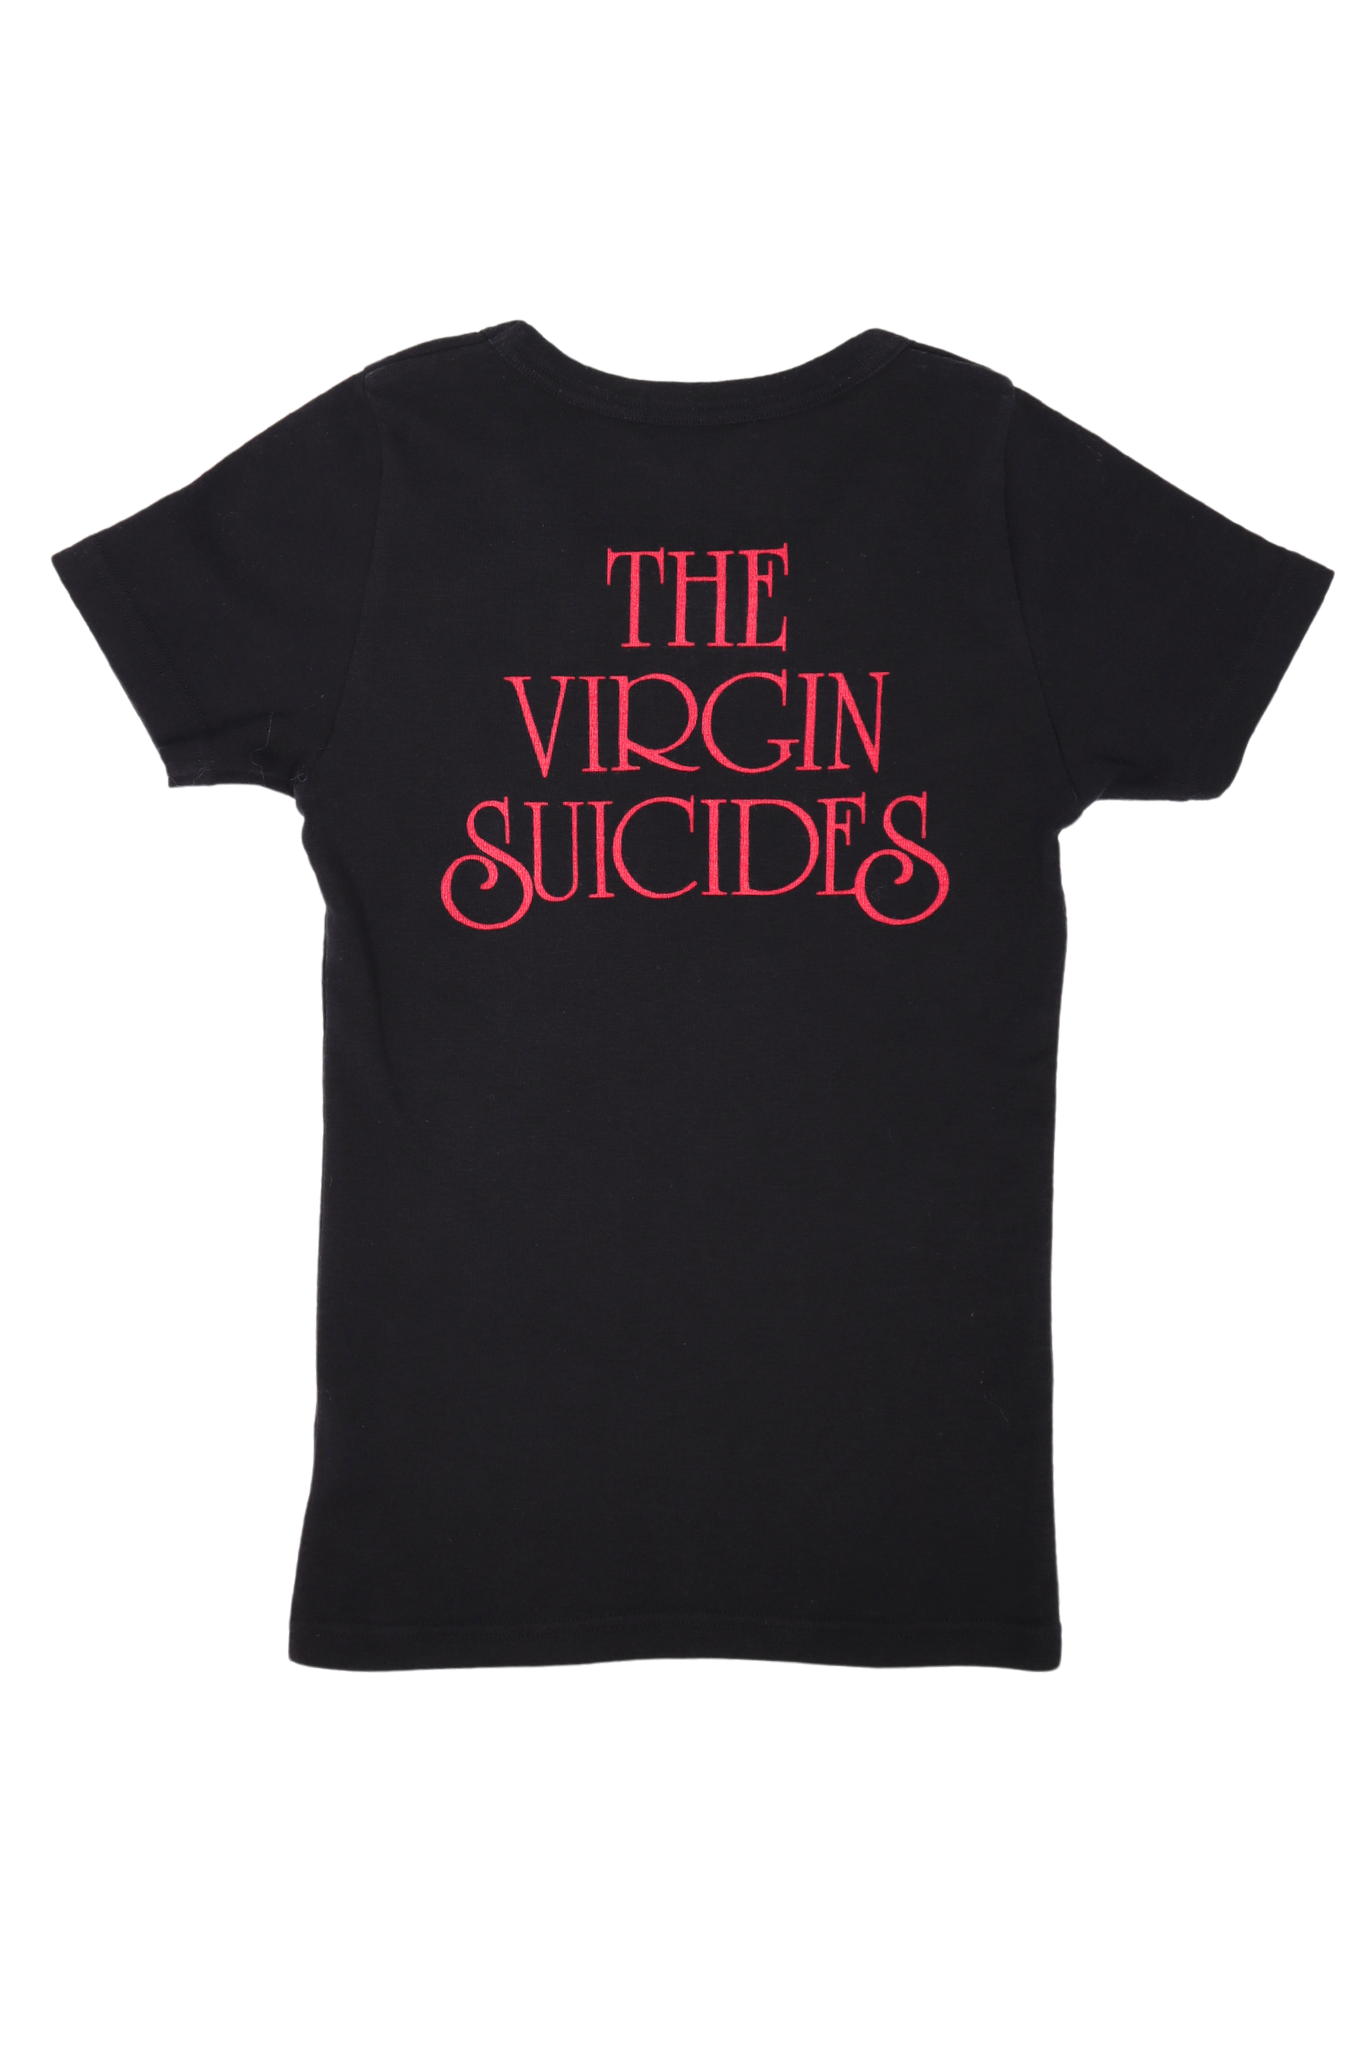 Hysteric Glamour The Virgin Suicides Baby Tee